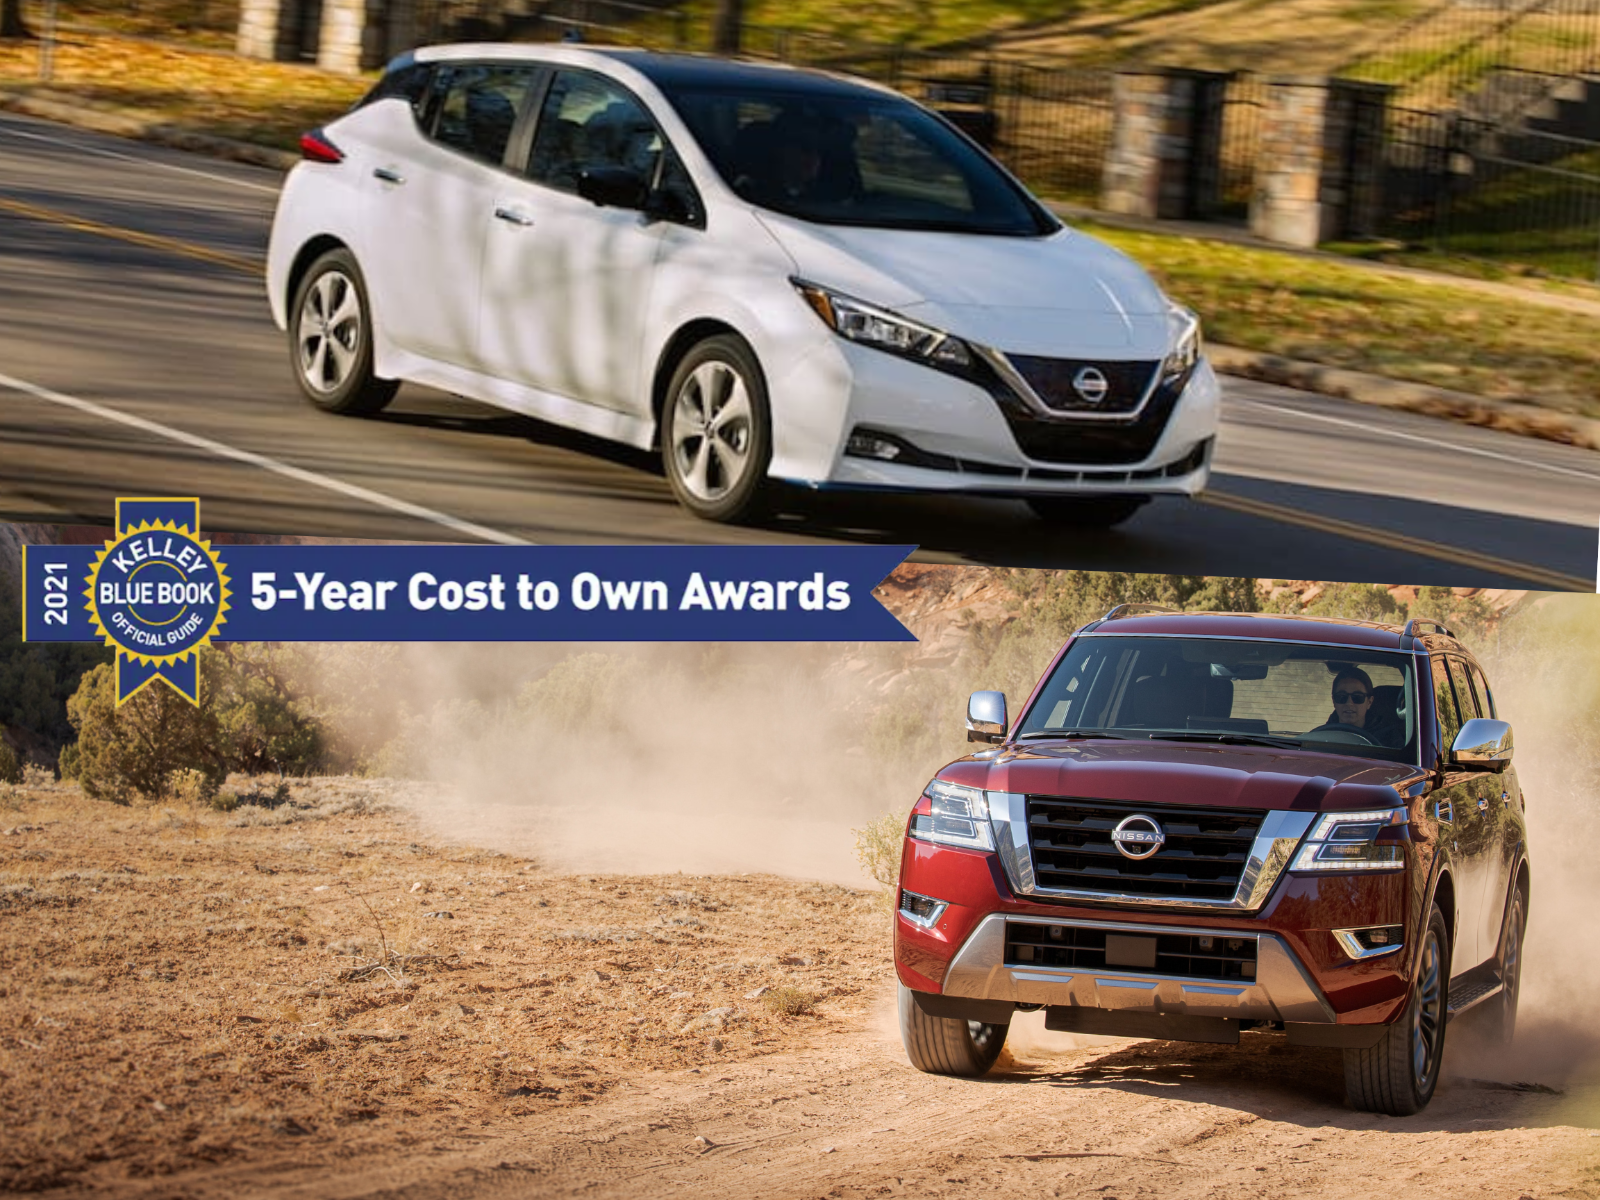 Built To Last: 2021 Nissan LEAF And Armada Take Home Top Honours From Kelley Blue Book